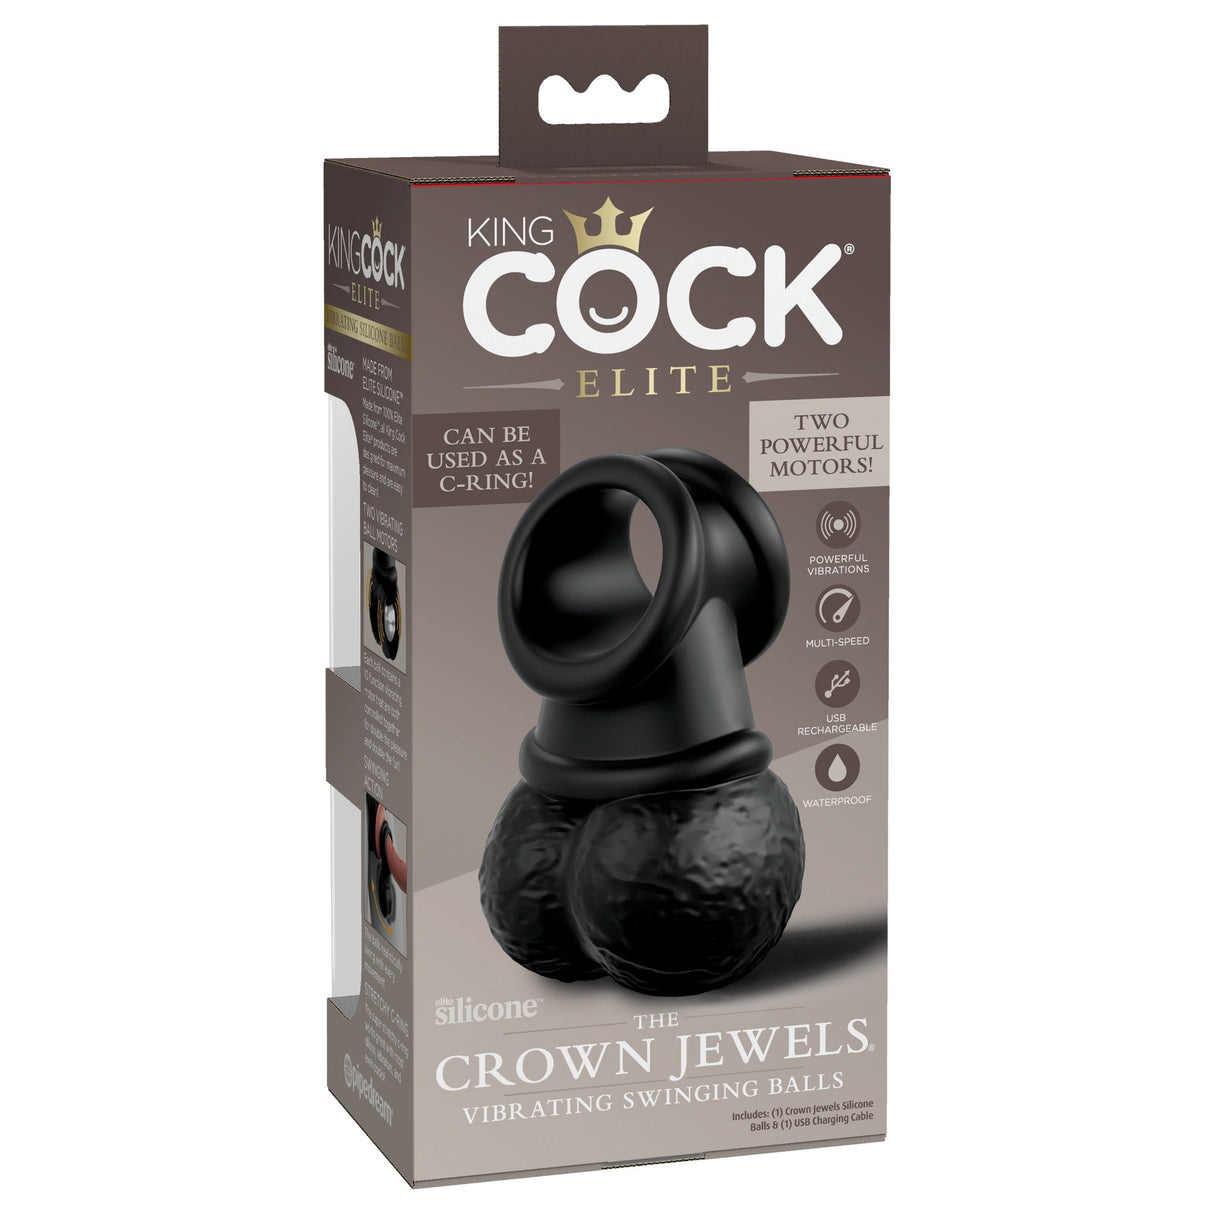 King Cock The Crown Jewels Vibrating Swinging Balls